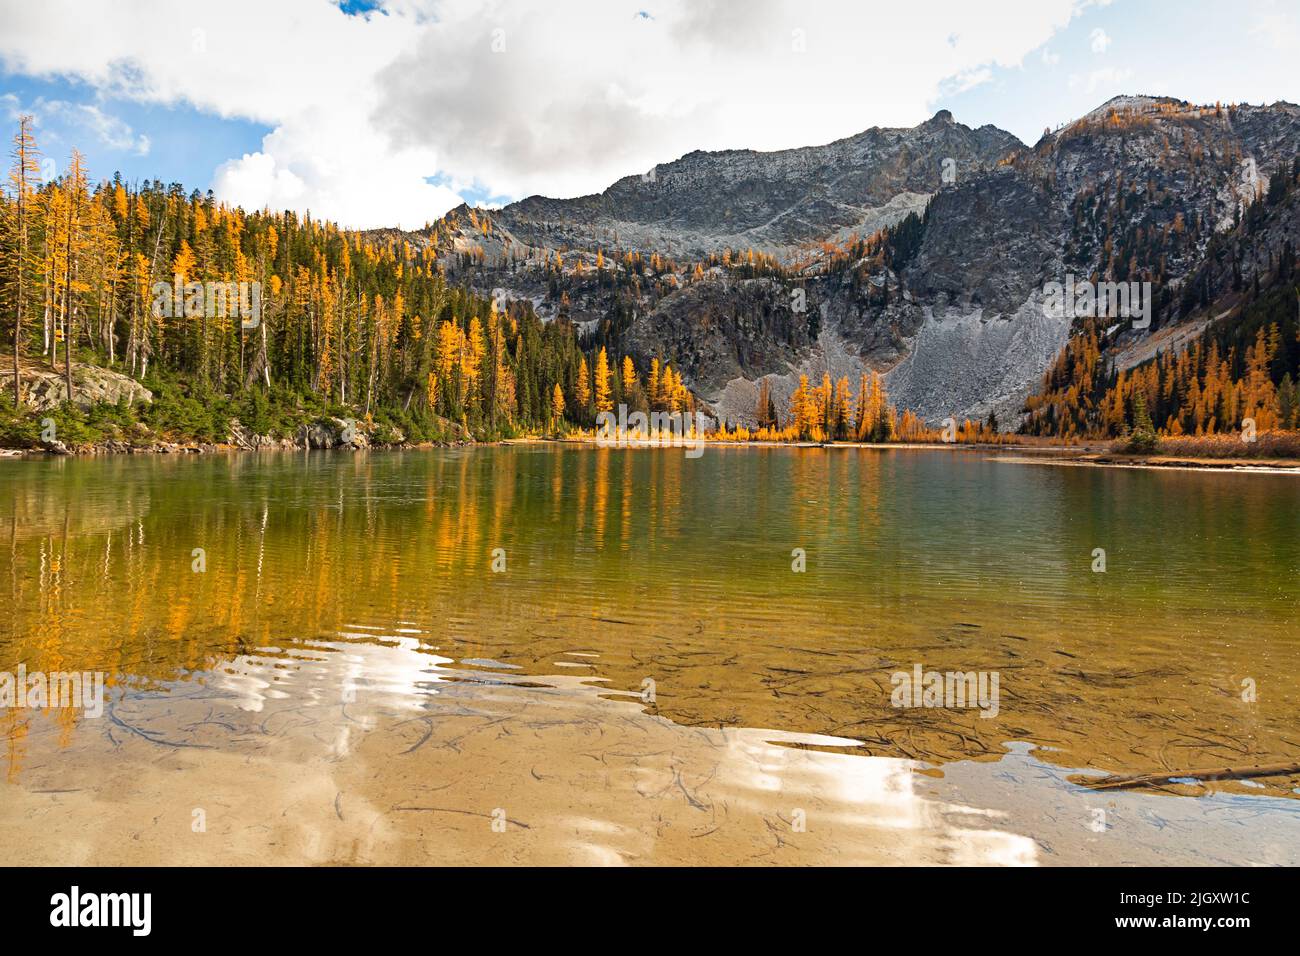 WA21736-00...WASHINGTON - Fifth of July Mountain and  Upper Larch Lake in the Glacier Peak Wilderness area. Stock Photo